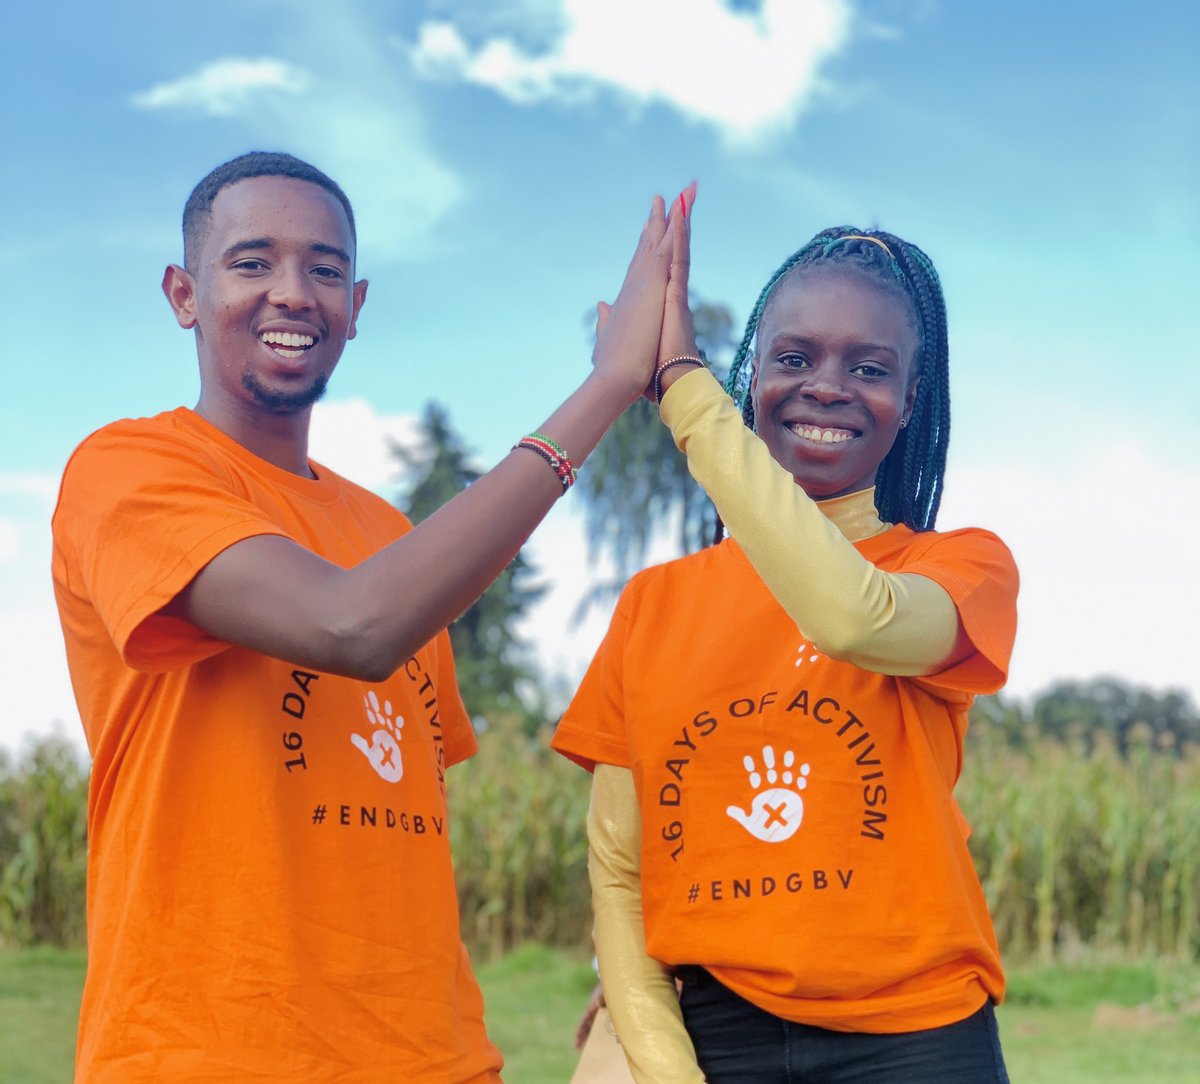 Complete the sentence 🖋
Investing in young people means investing in ...........................
#UNFPAYAPKe 
#1vision3zeros